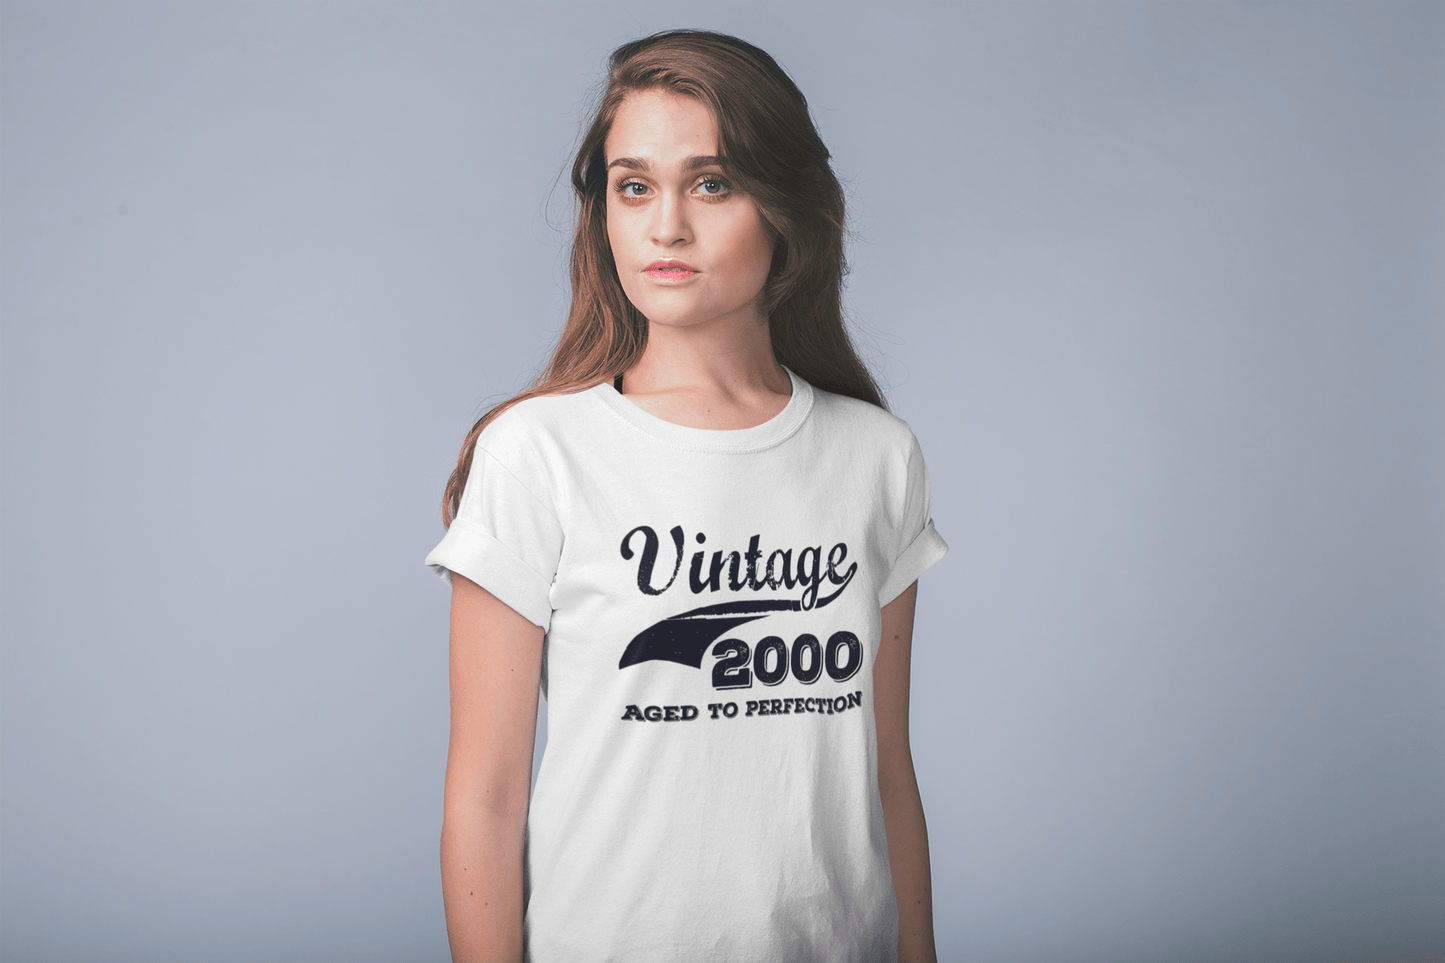 Vintage Aged To Perfection 2000, White, Women's Short Sleeve Round Neck T-shirt, gift t-shirt 00344